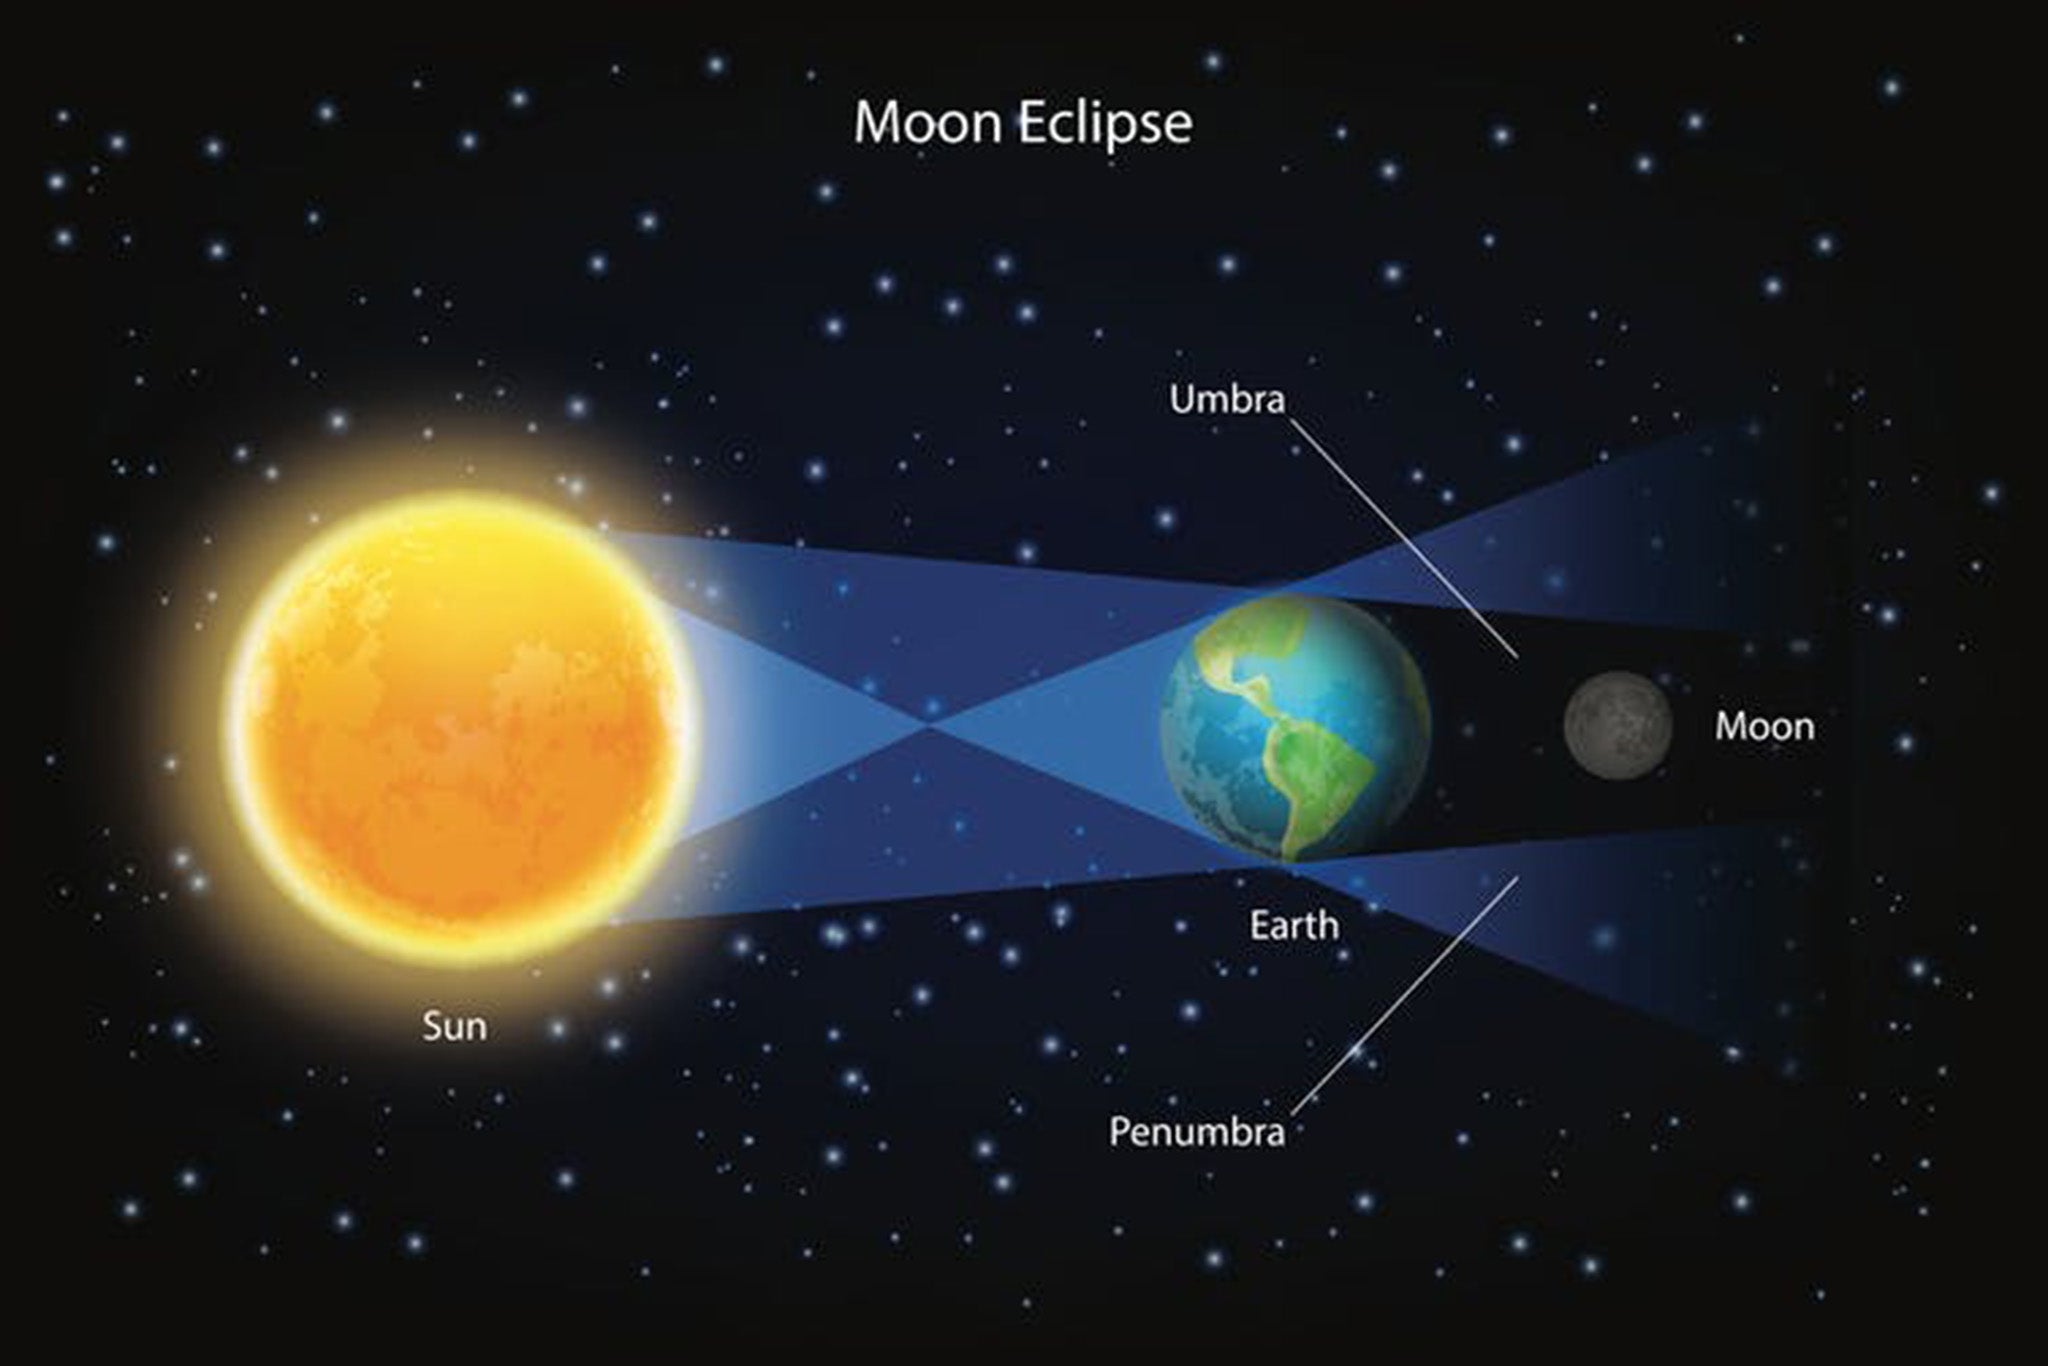 In a lunar eclipse, the Earth passes directly between the moon and the sun